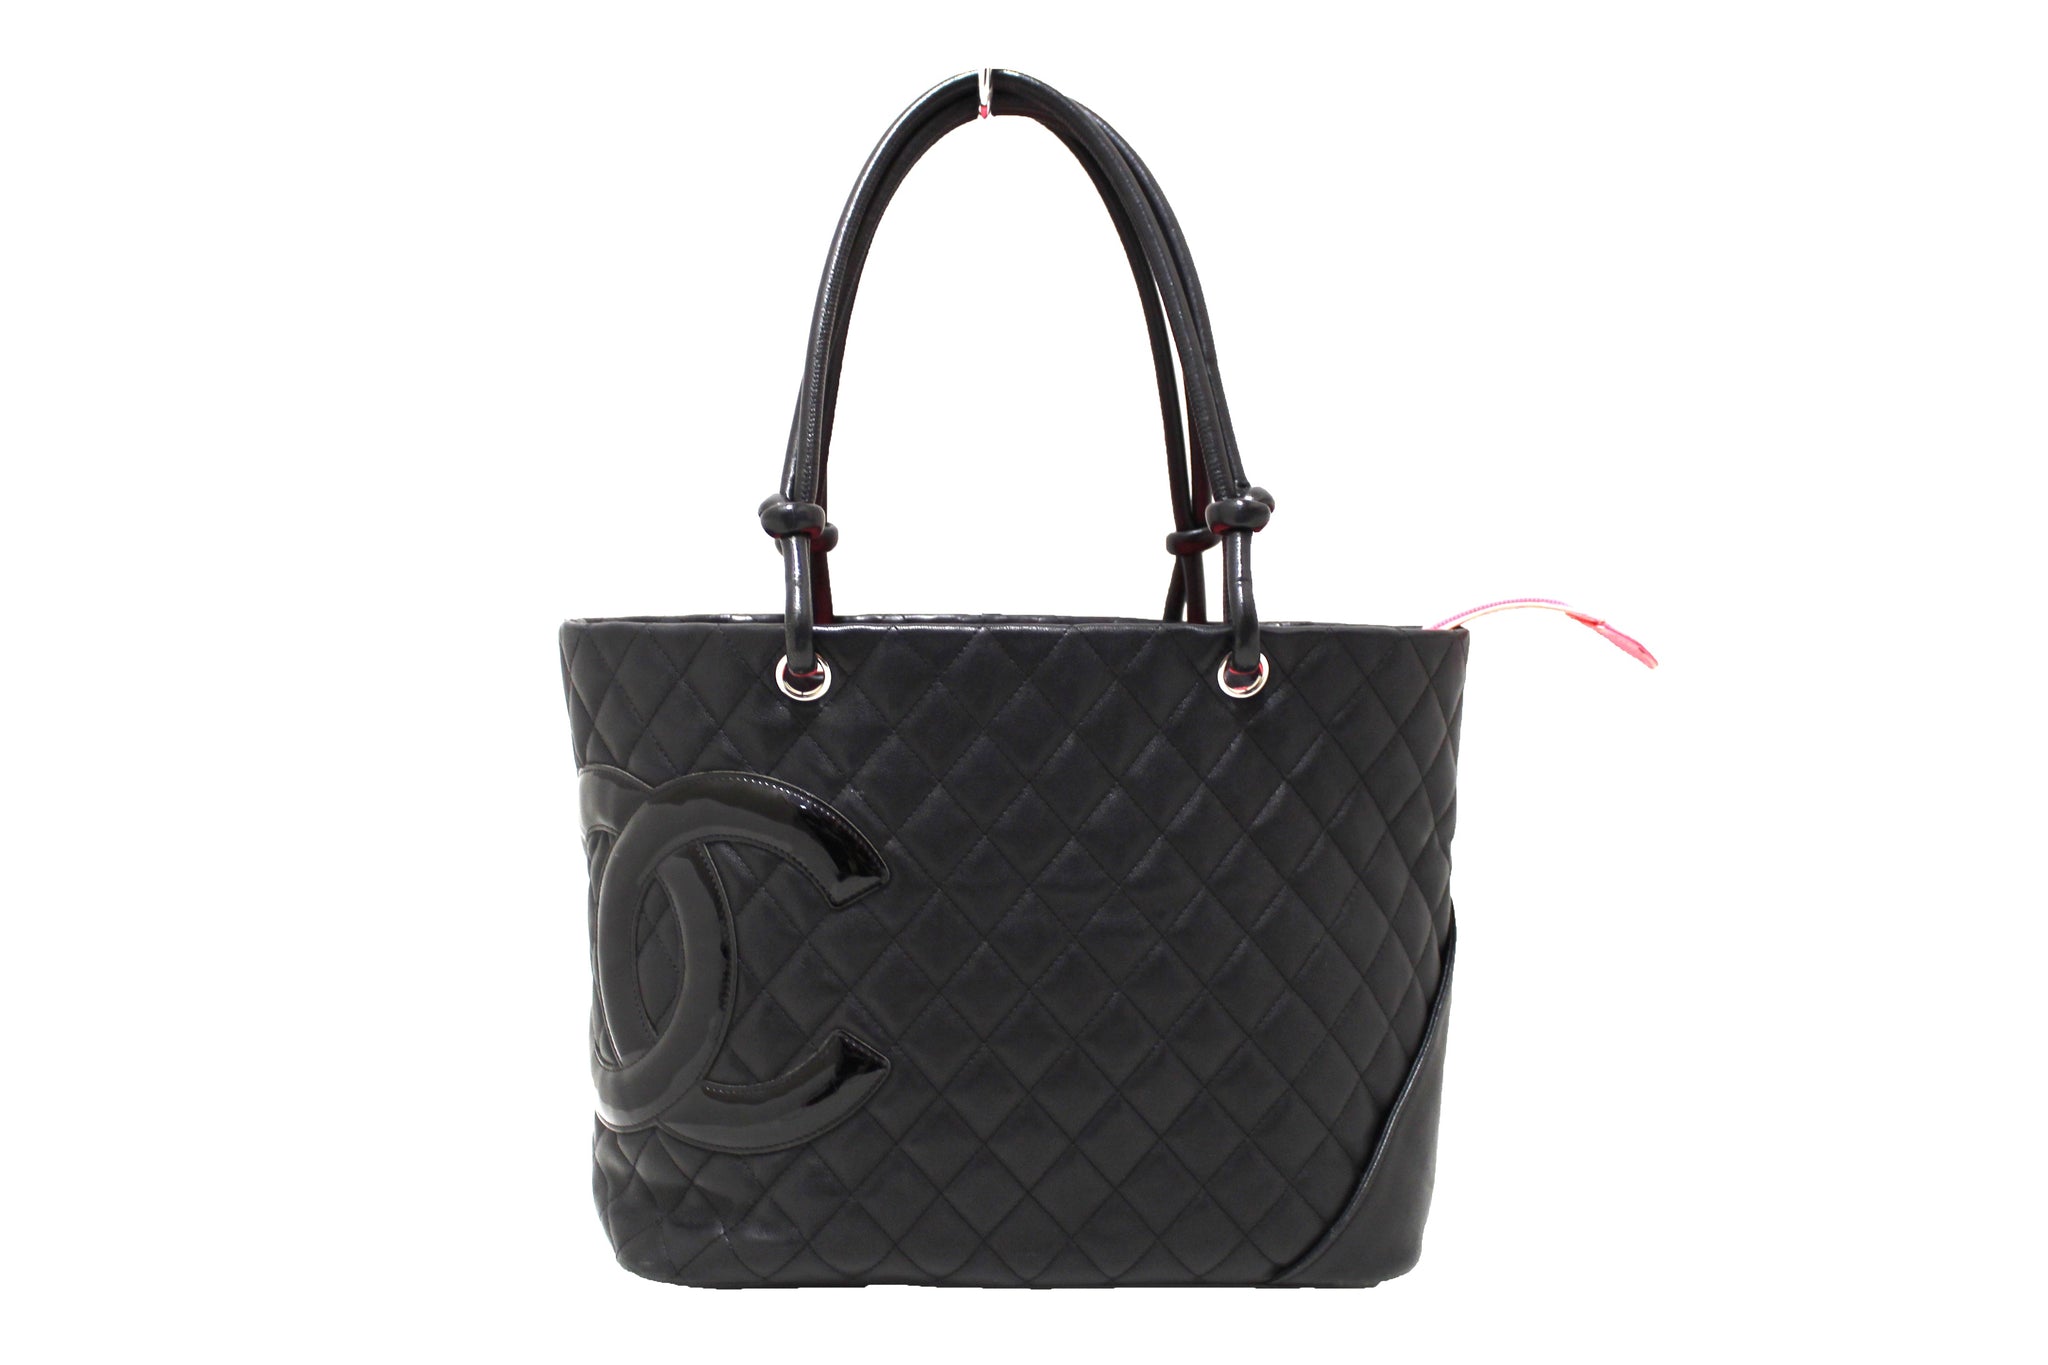 Chanel cambon line quilted shoulder bag black white leather ladies CHANEL